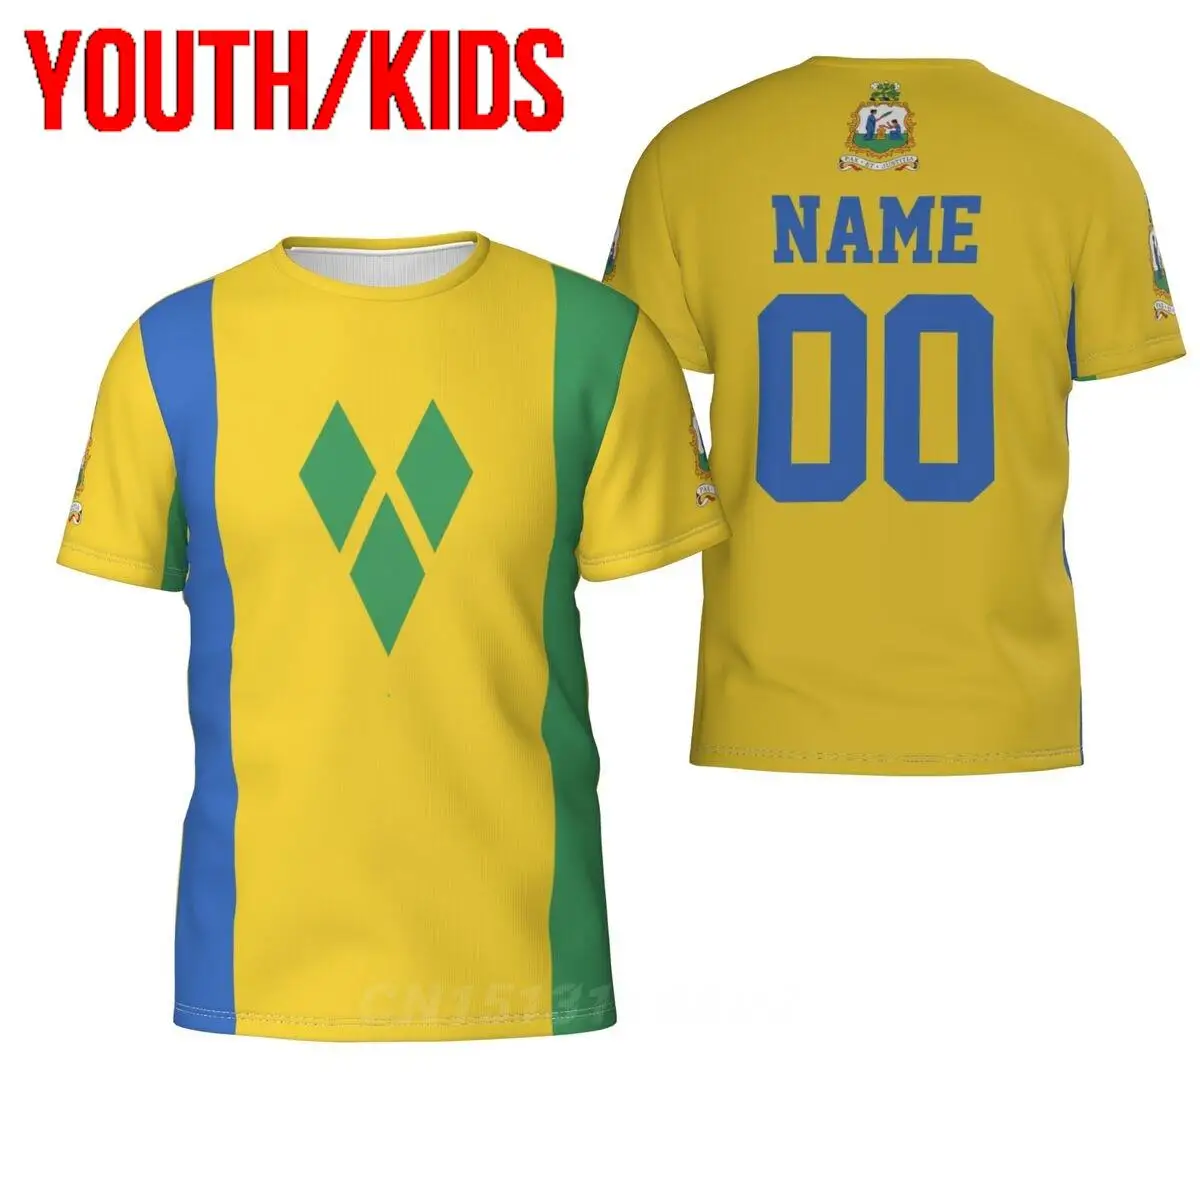 

Youth Kids Custom Name Number Saint Vincent And The Grenadines Country Flag 3D T-shirts Clothes T shirt Boy Girl Tees Tops